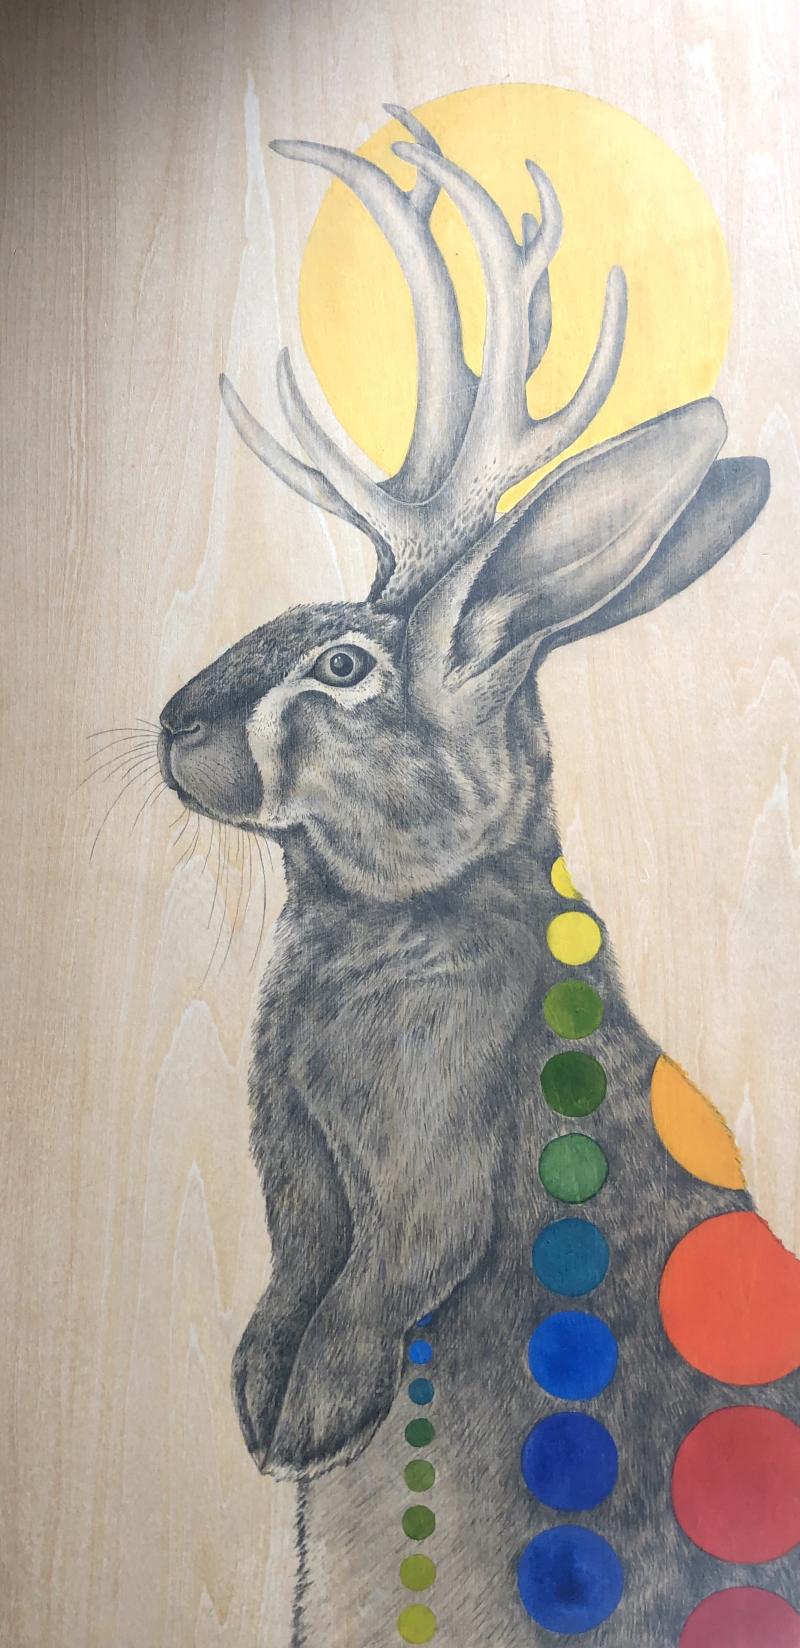 Jackalope by Terri Huro - Excellence and Purchase Award, Other Art Forms